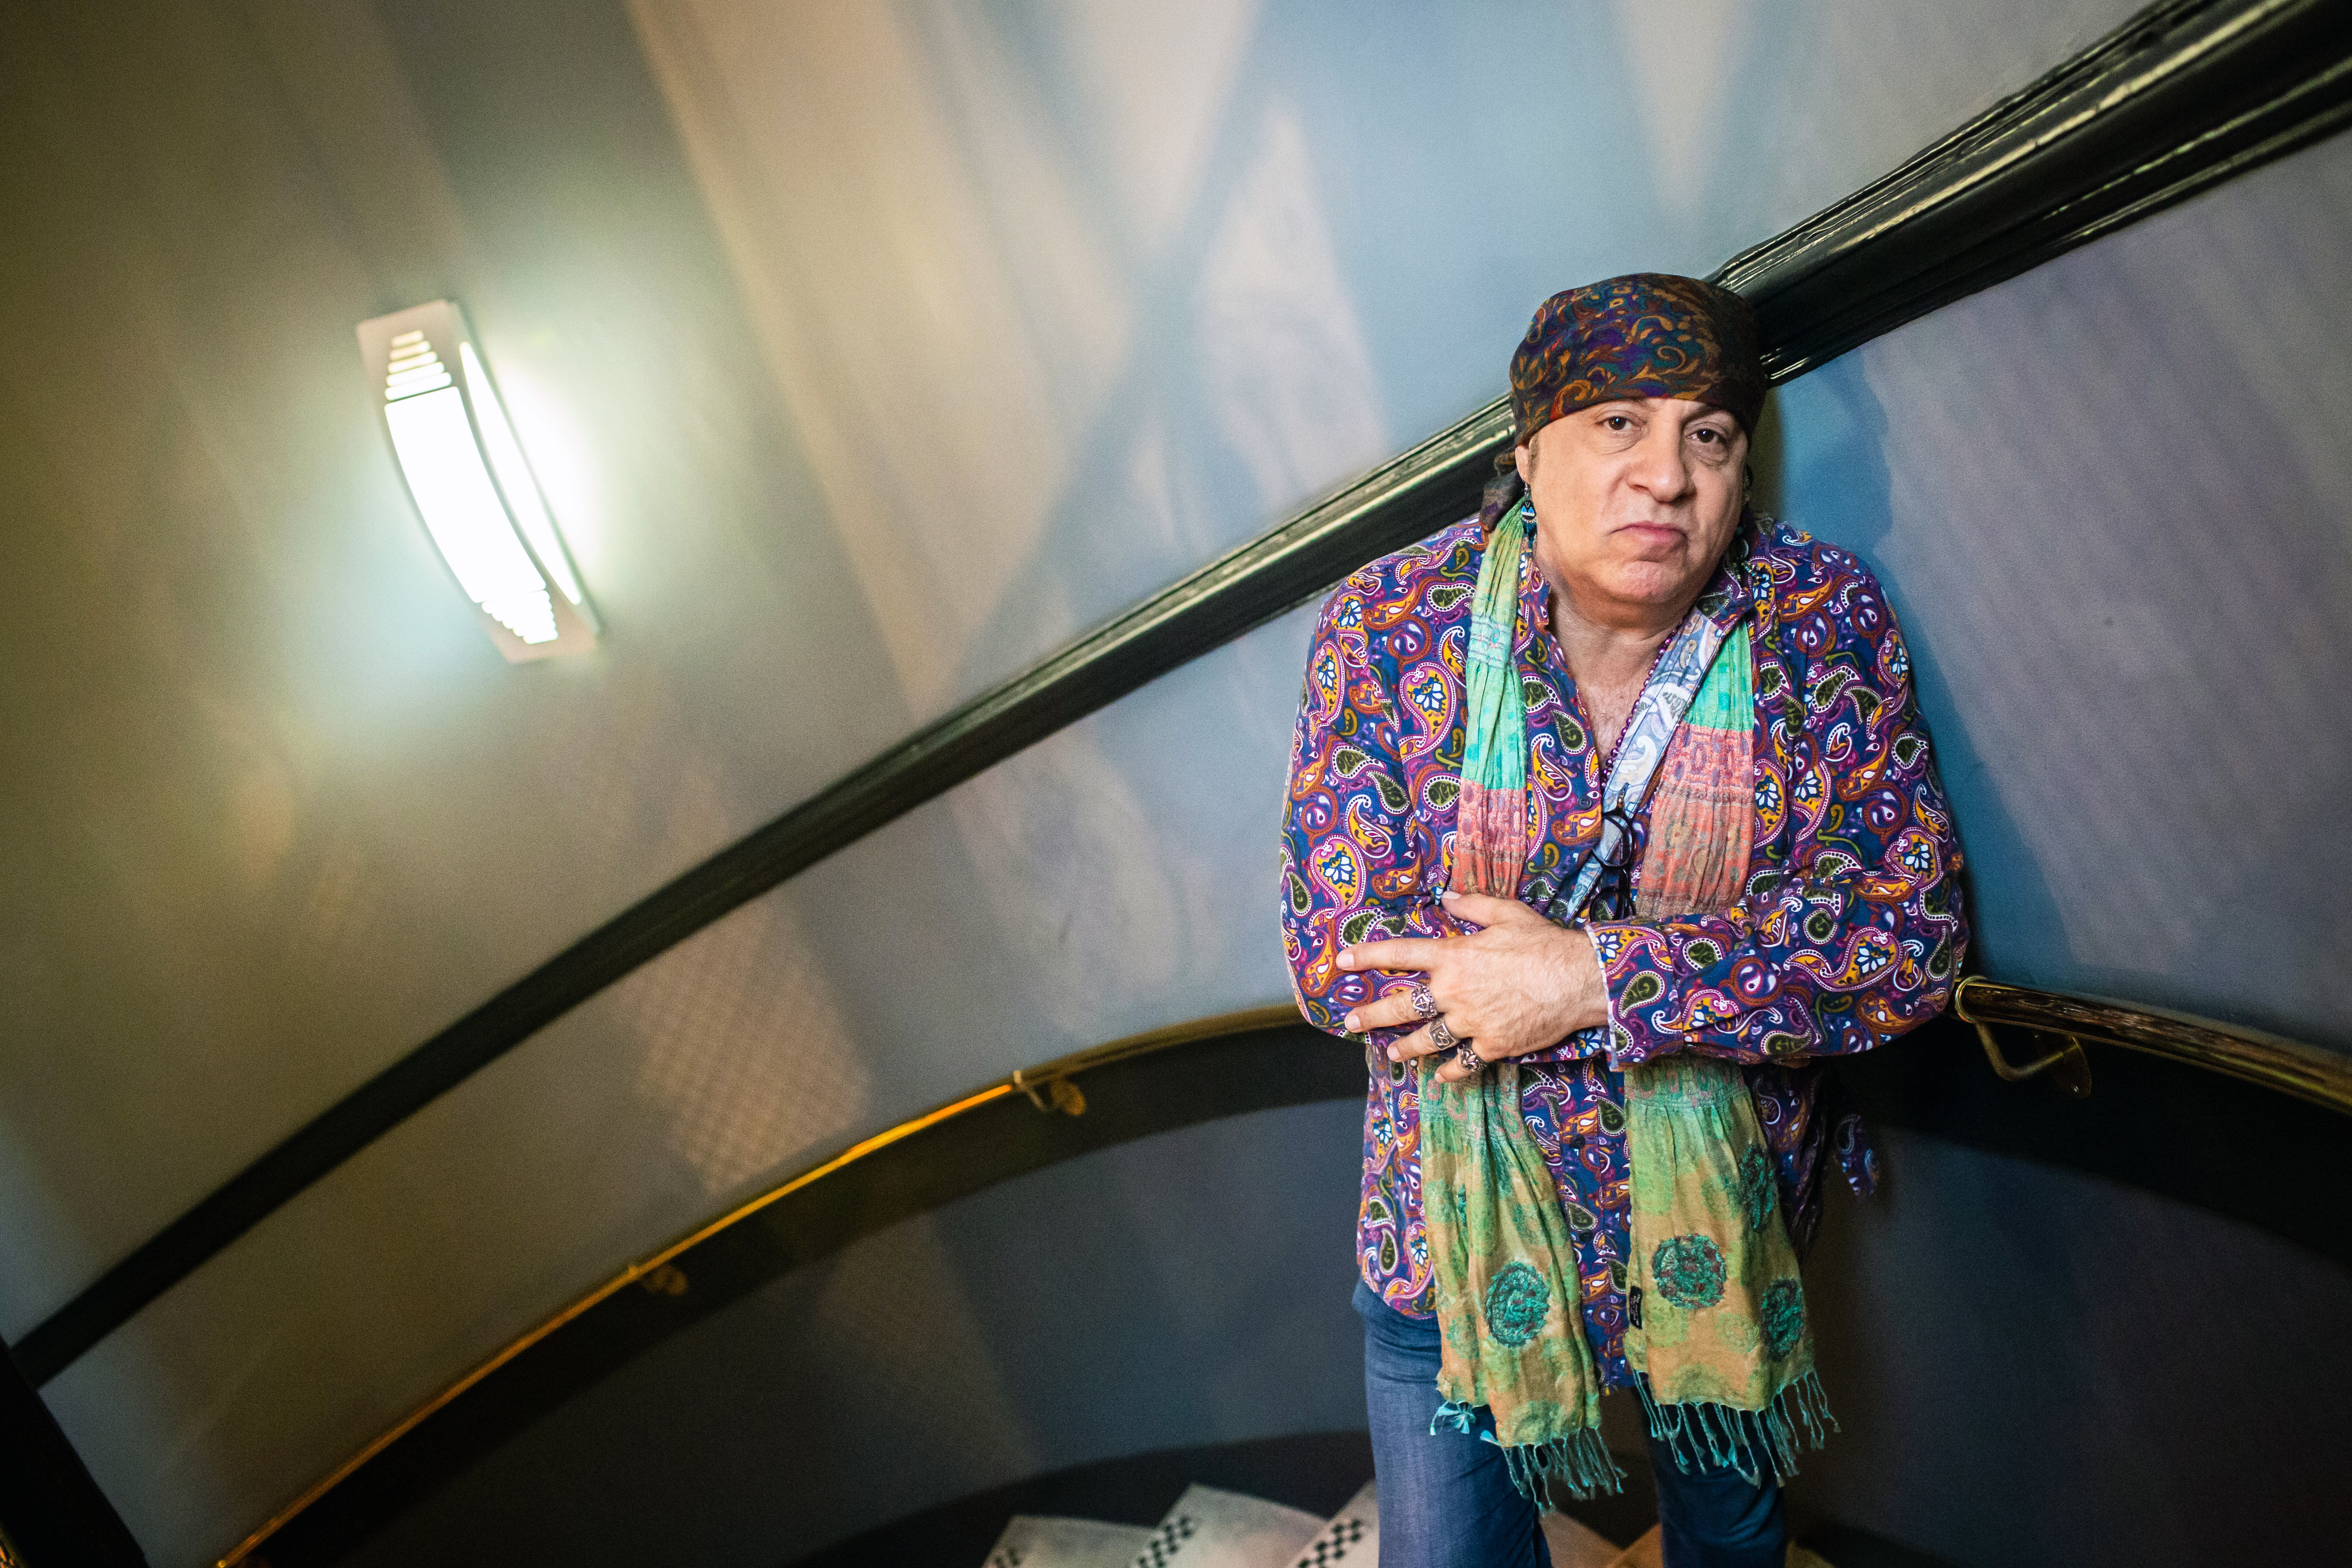 Steven Van Zandt treated fans to an intimate live DJ session at Hard Rock Cafe Glasgow